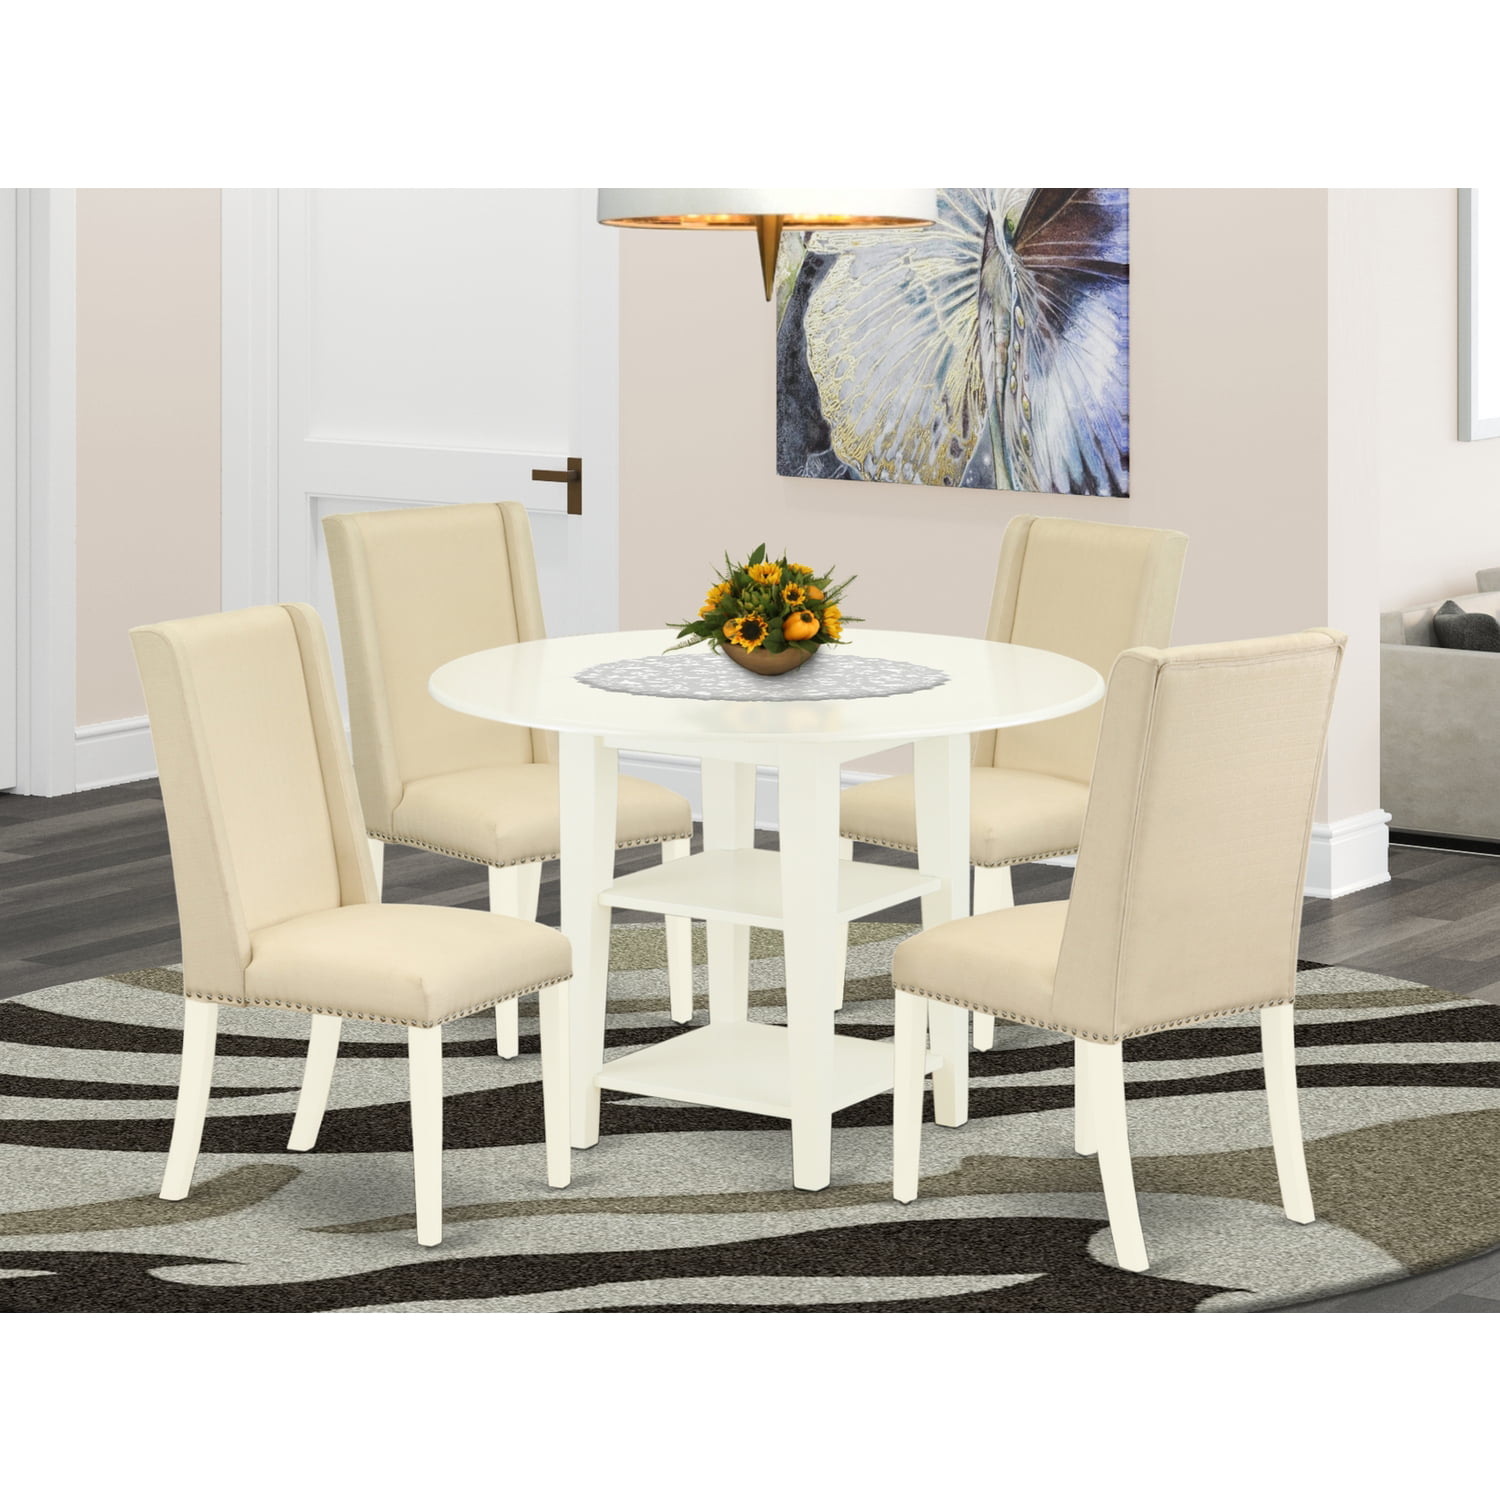 Lwh 01 5 Piece Dining Table Set, Small Round Kitchen Table Set For 4 Persons